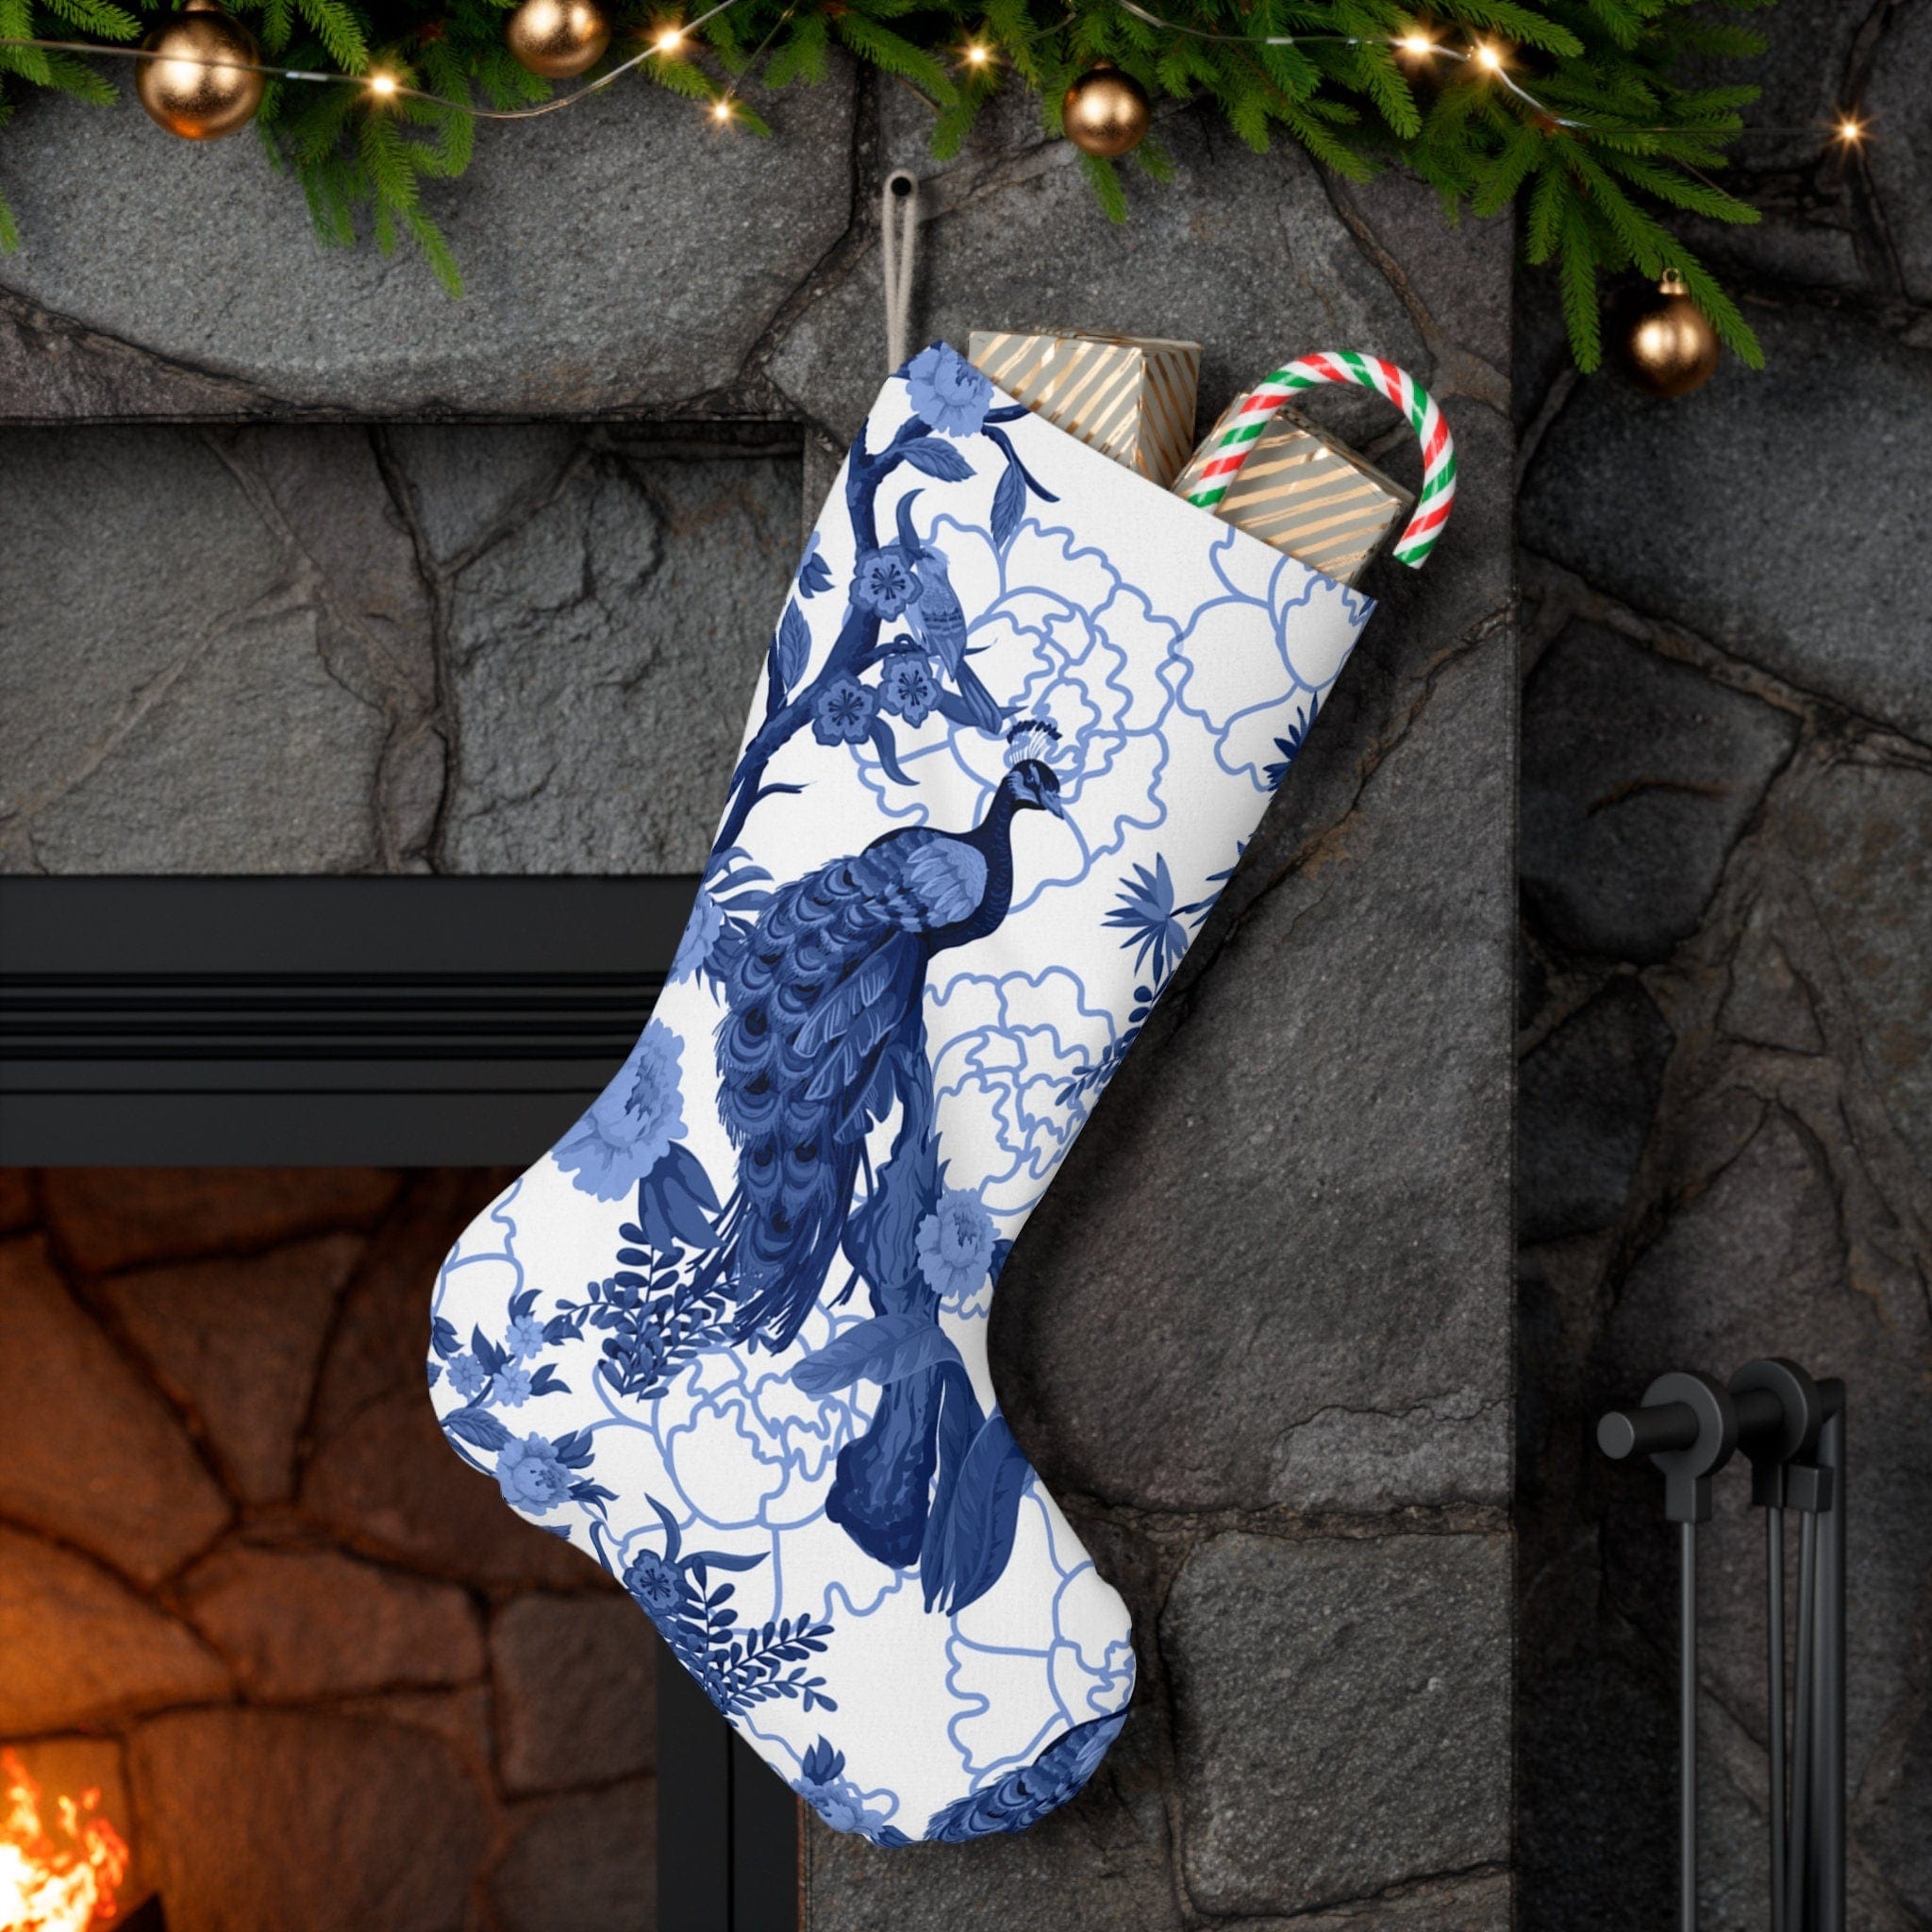 Kate McEnroe New York Chinoiserie Floral Peacock Holiday Stockings, Blue and White Botanical Toile Jungle Motifs Christmas Mantle DecorationHoliday Stockings15899367389009277432